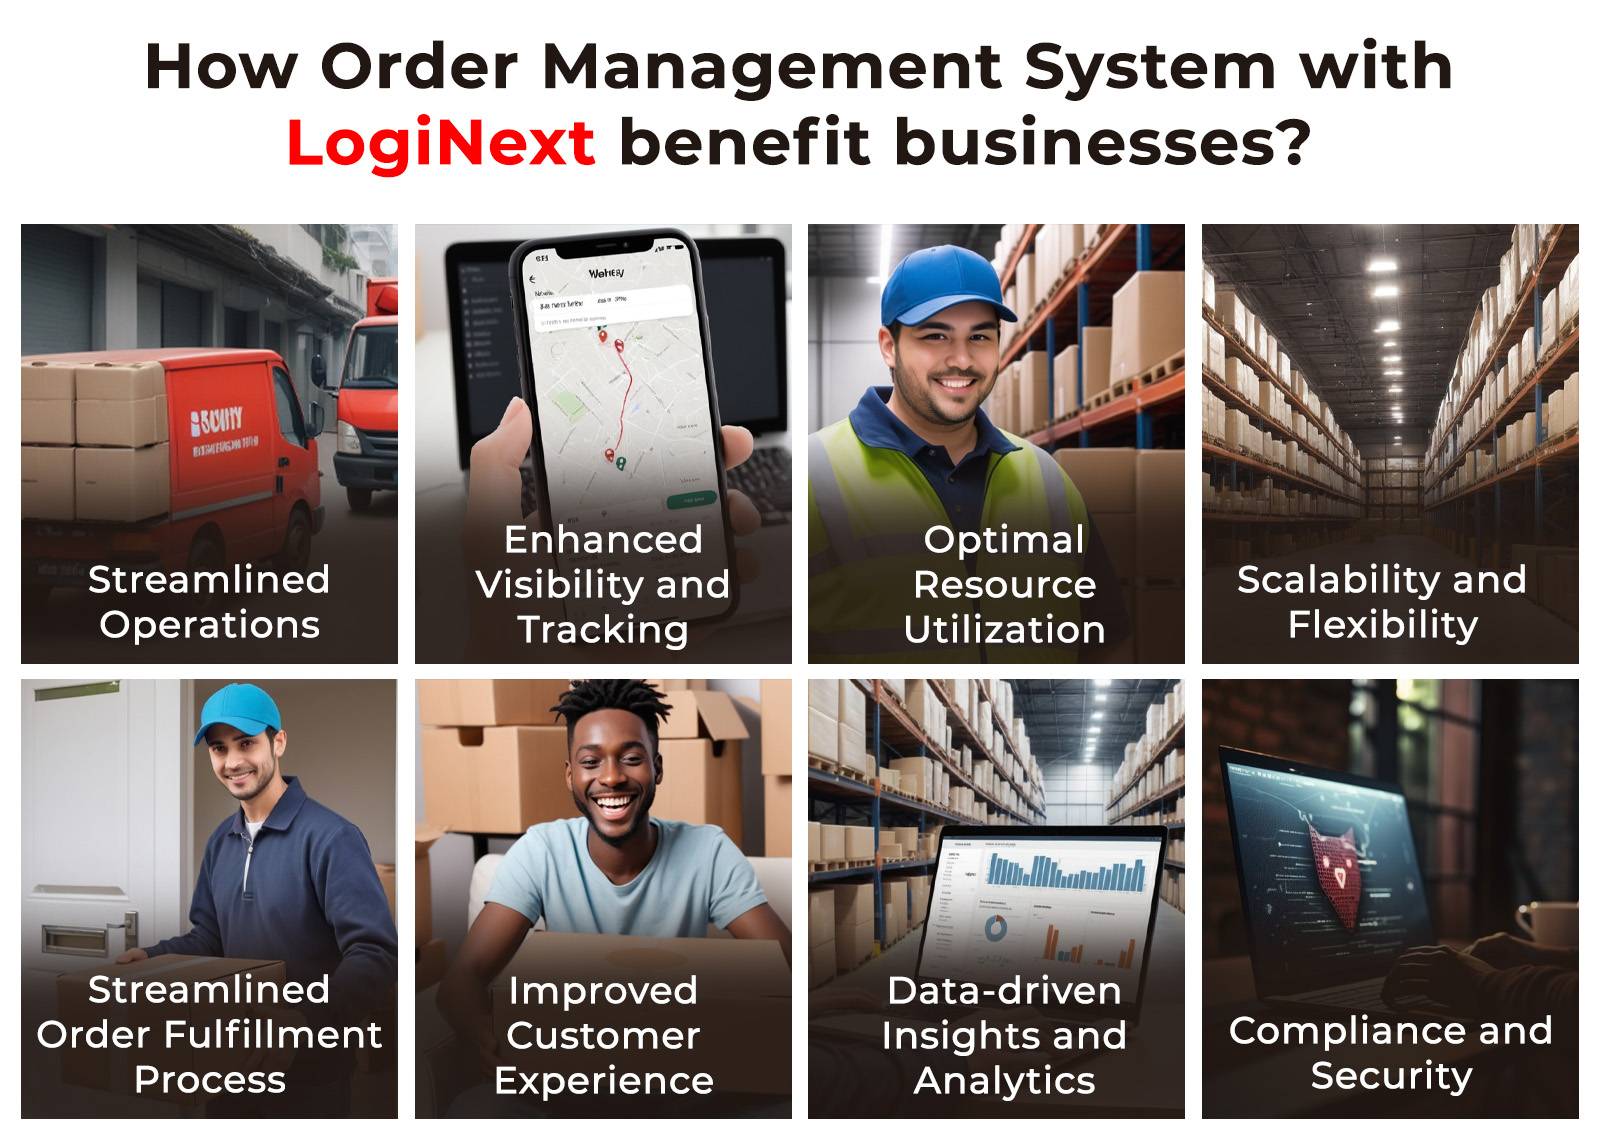 LogiNext x OMS integration for maximum business potential